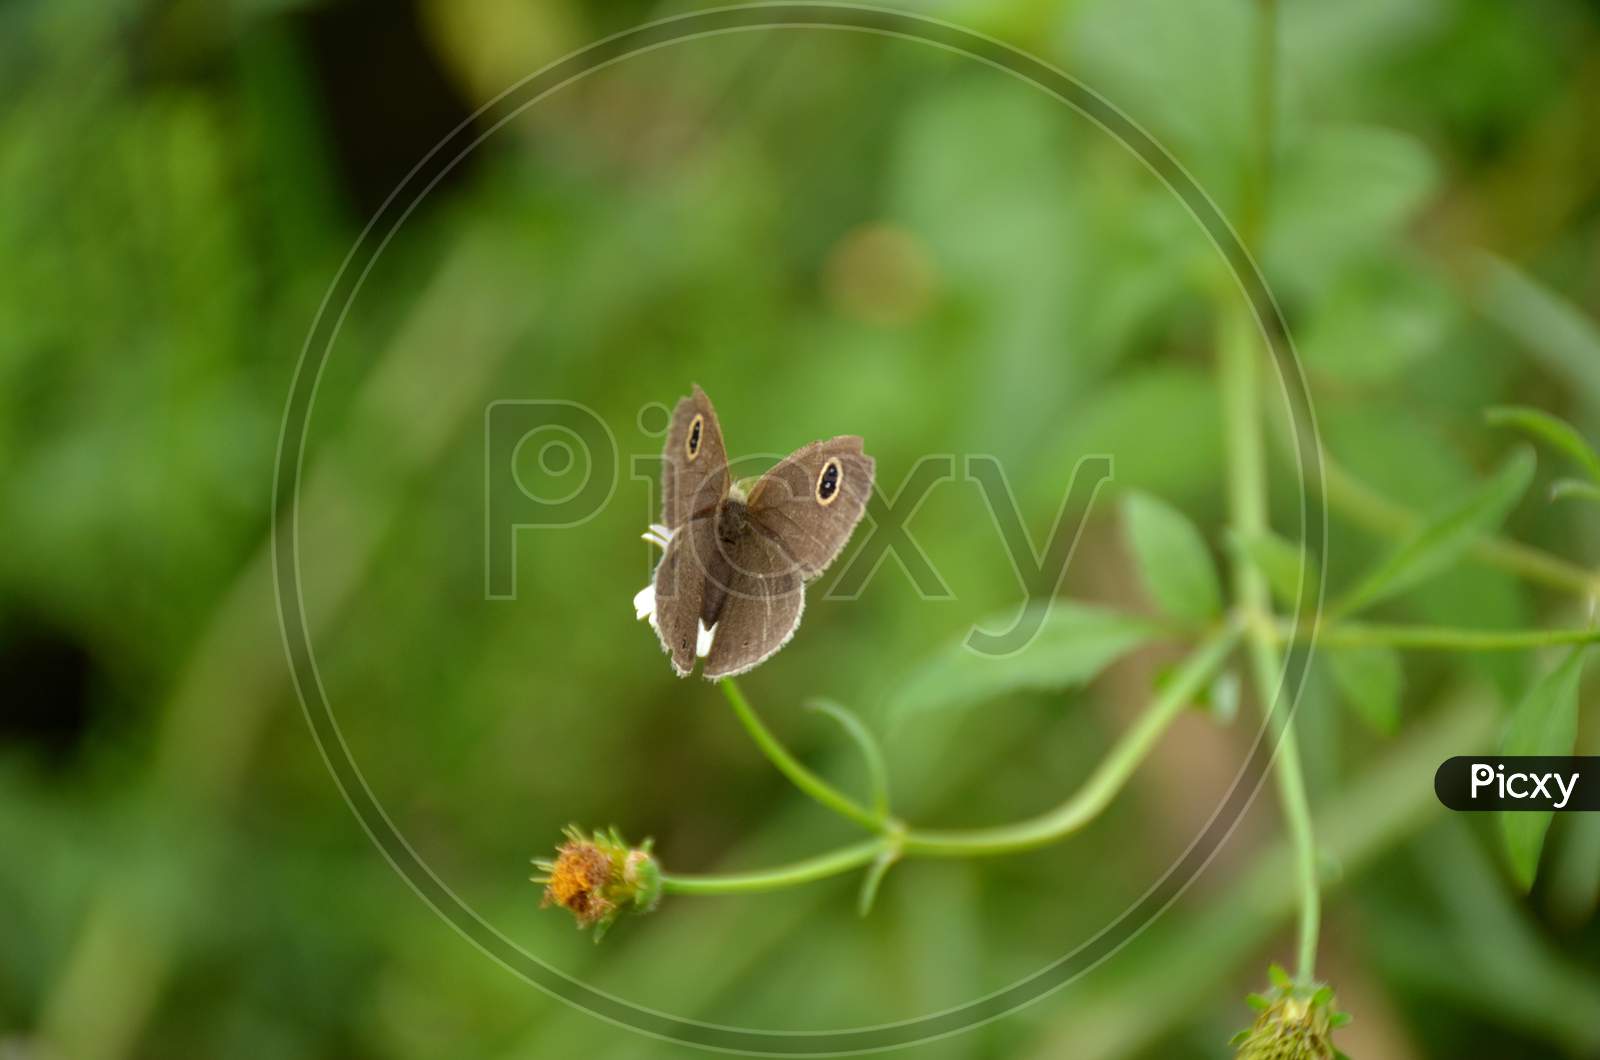 The Small Beautiful Brown Butterfly Hold On White Flower With Plant.